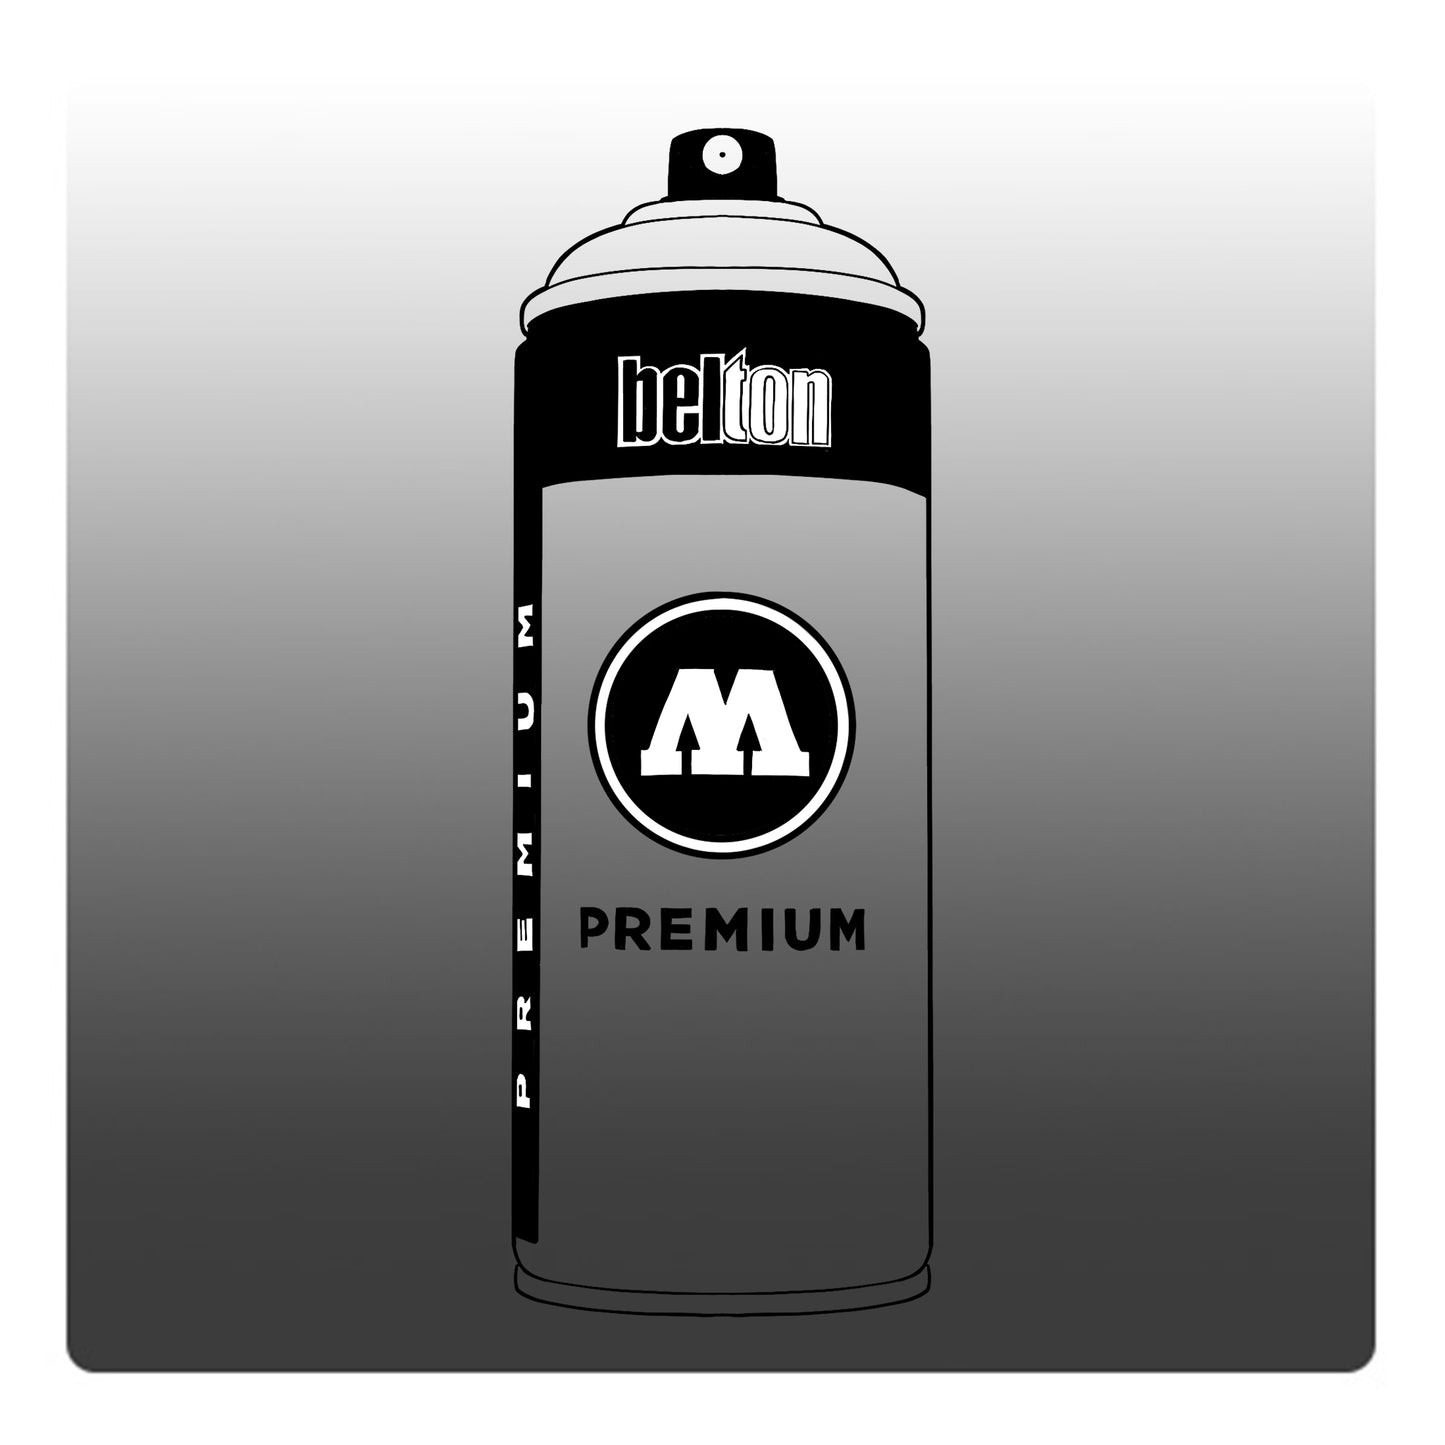 A line drawing of a spray paint can with a transparent, dark grey color swatch.